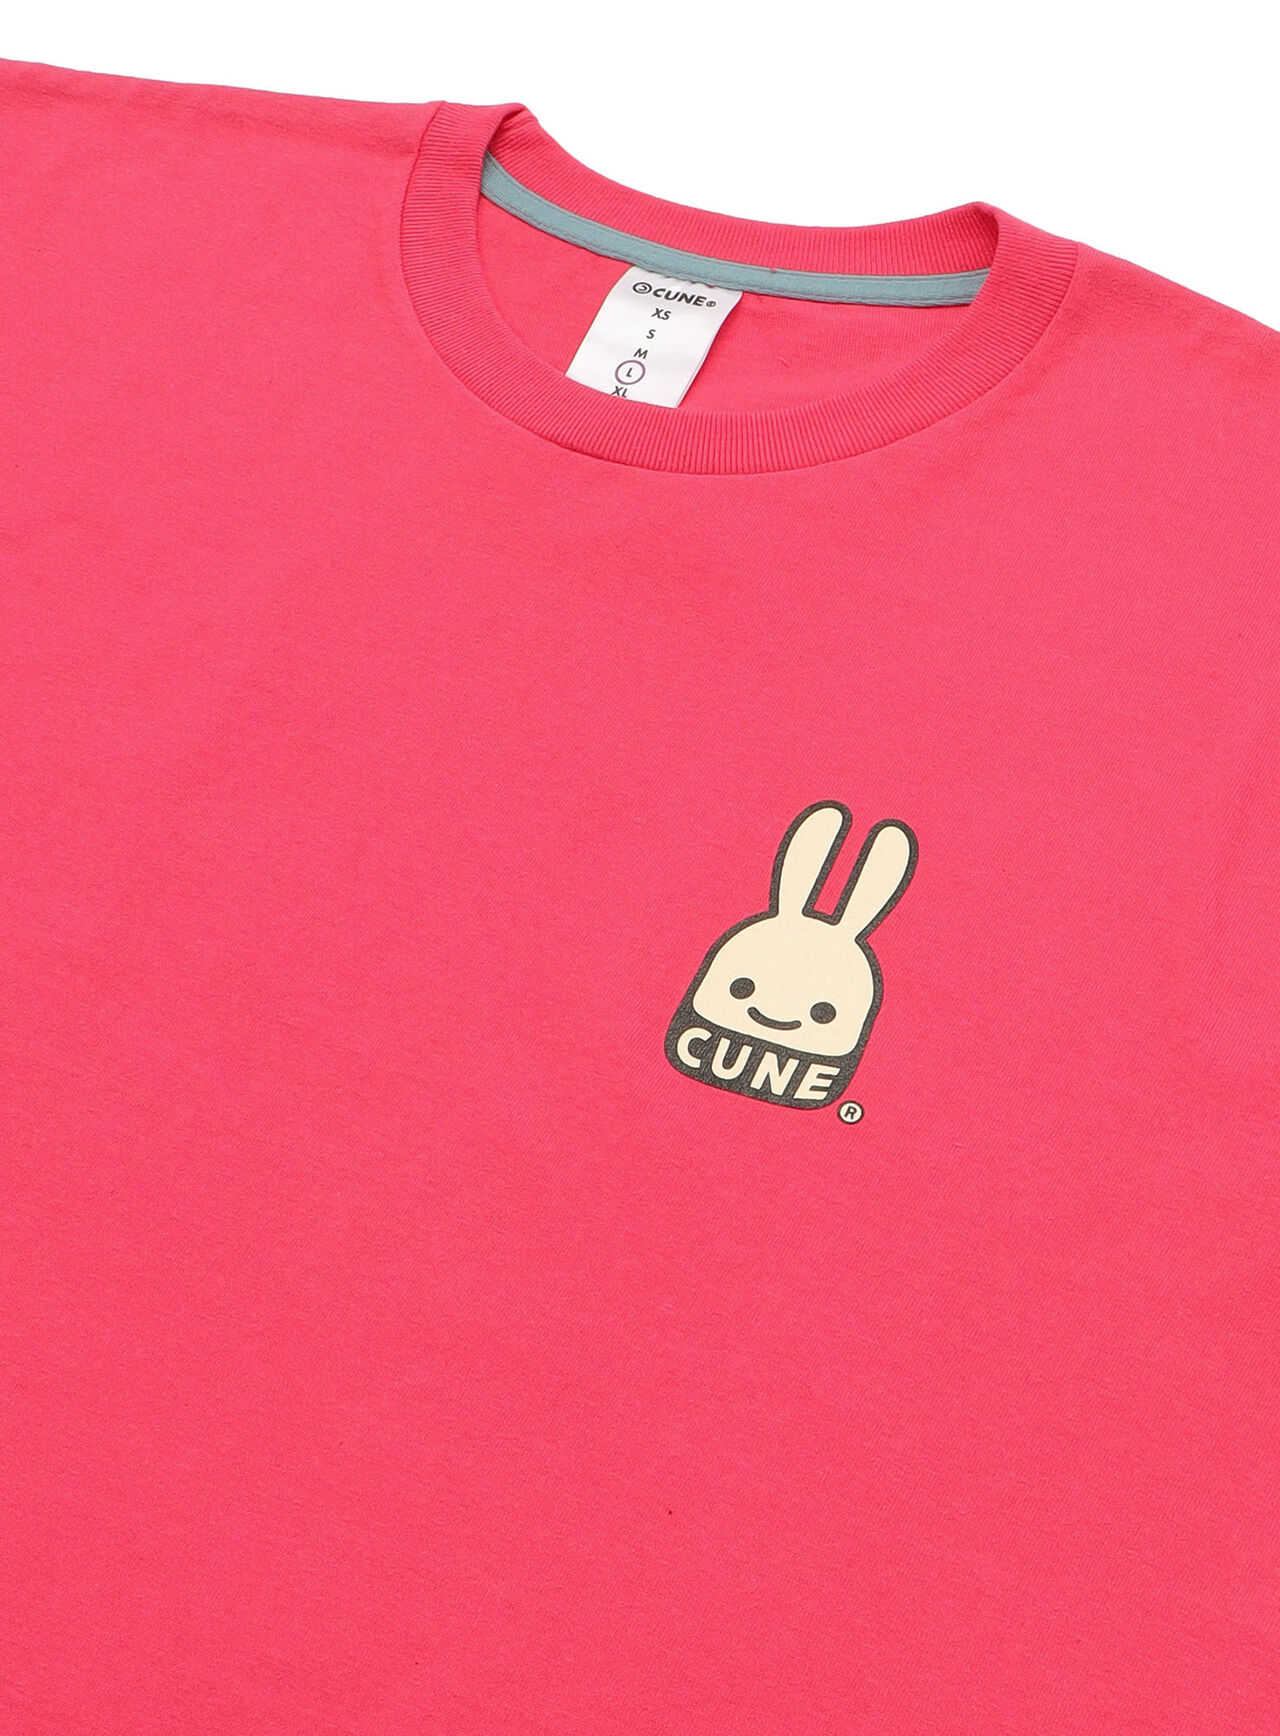 S/S Tee CUNE Rabbit,L, large image number 6